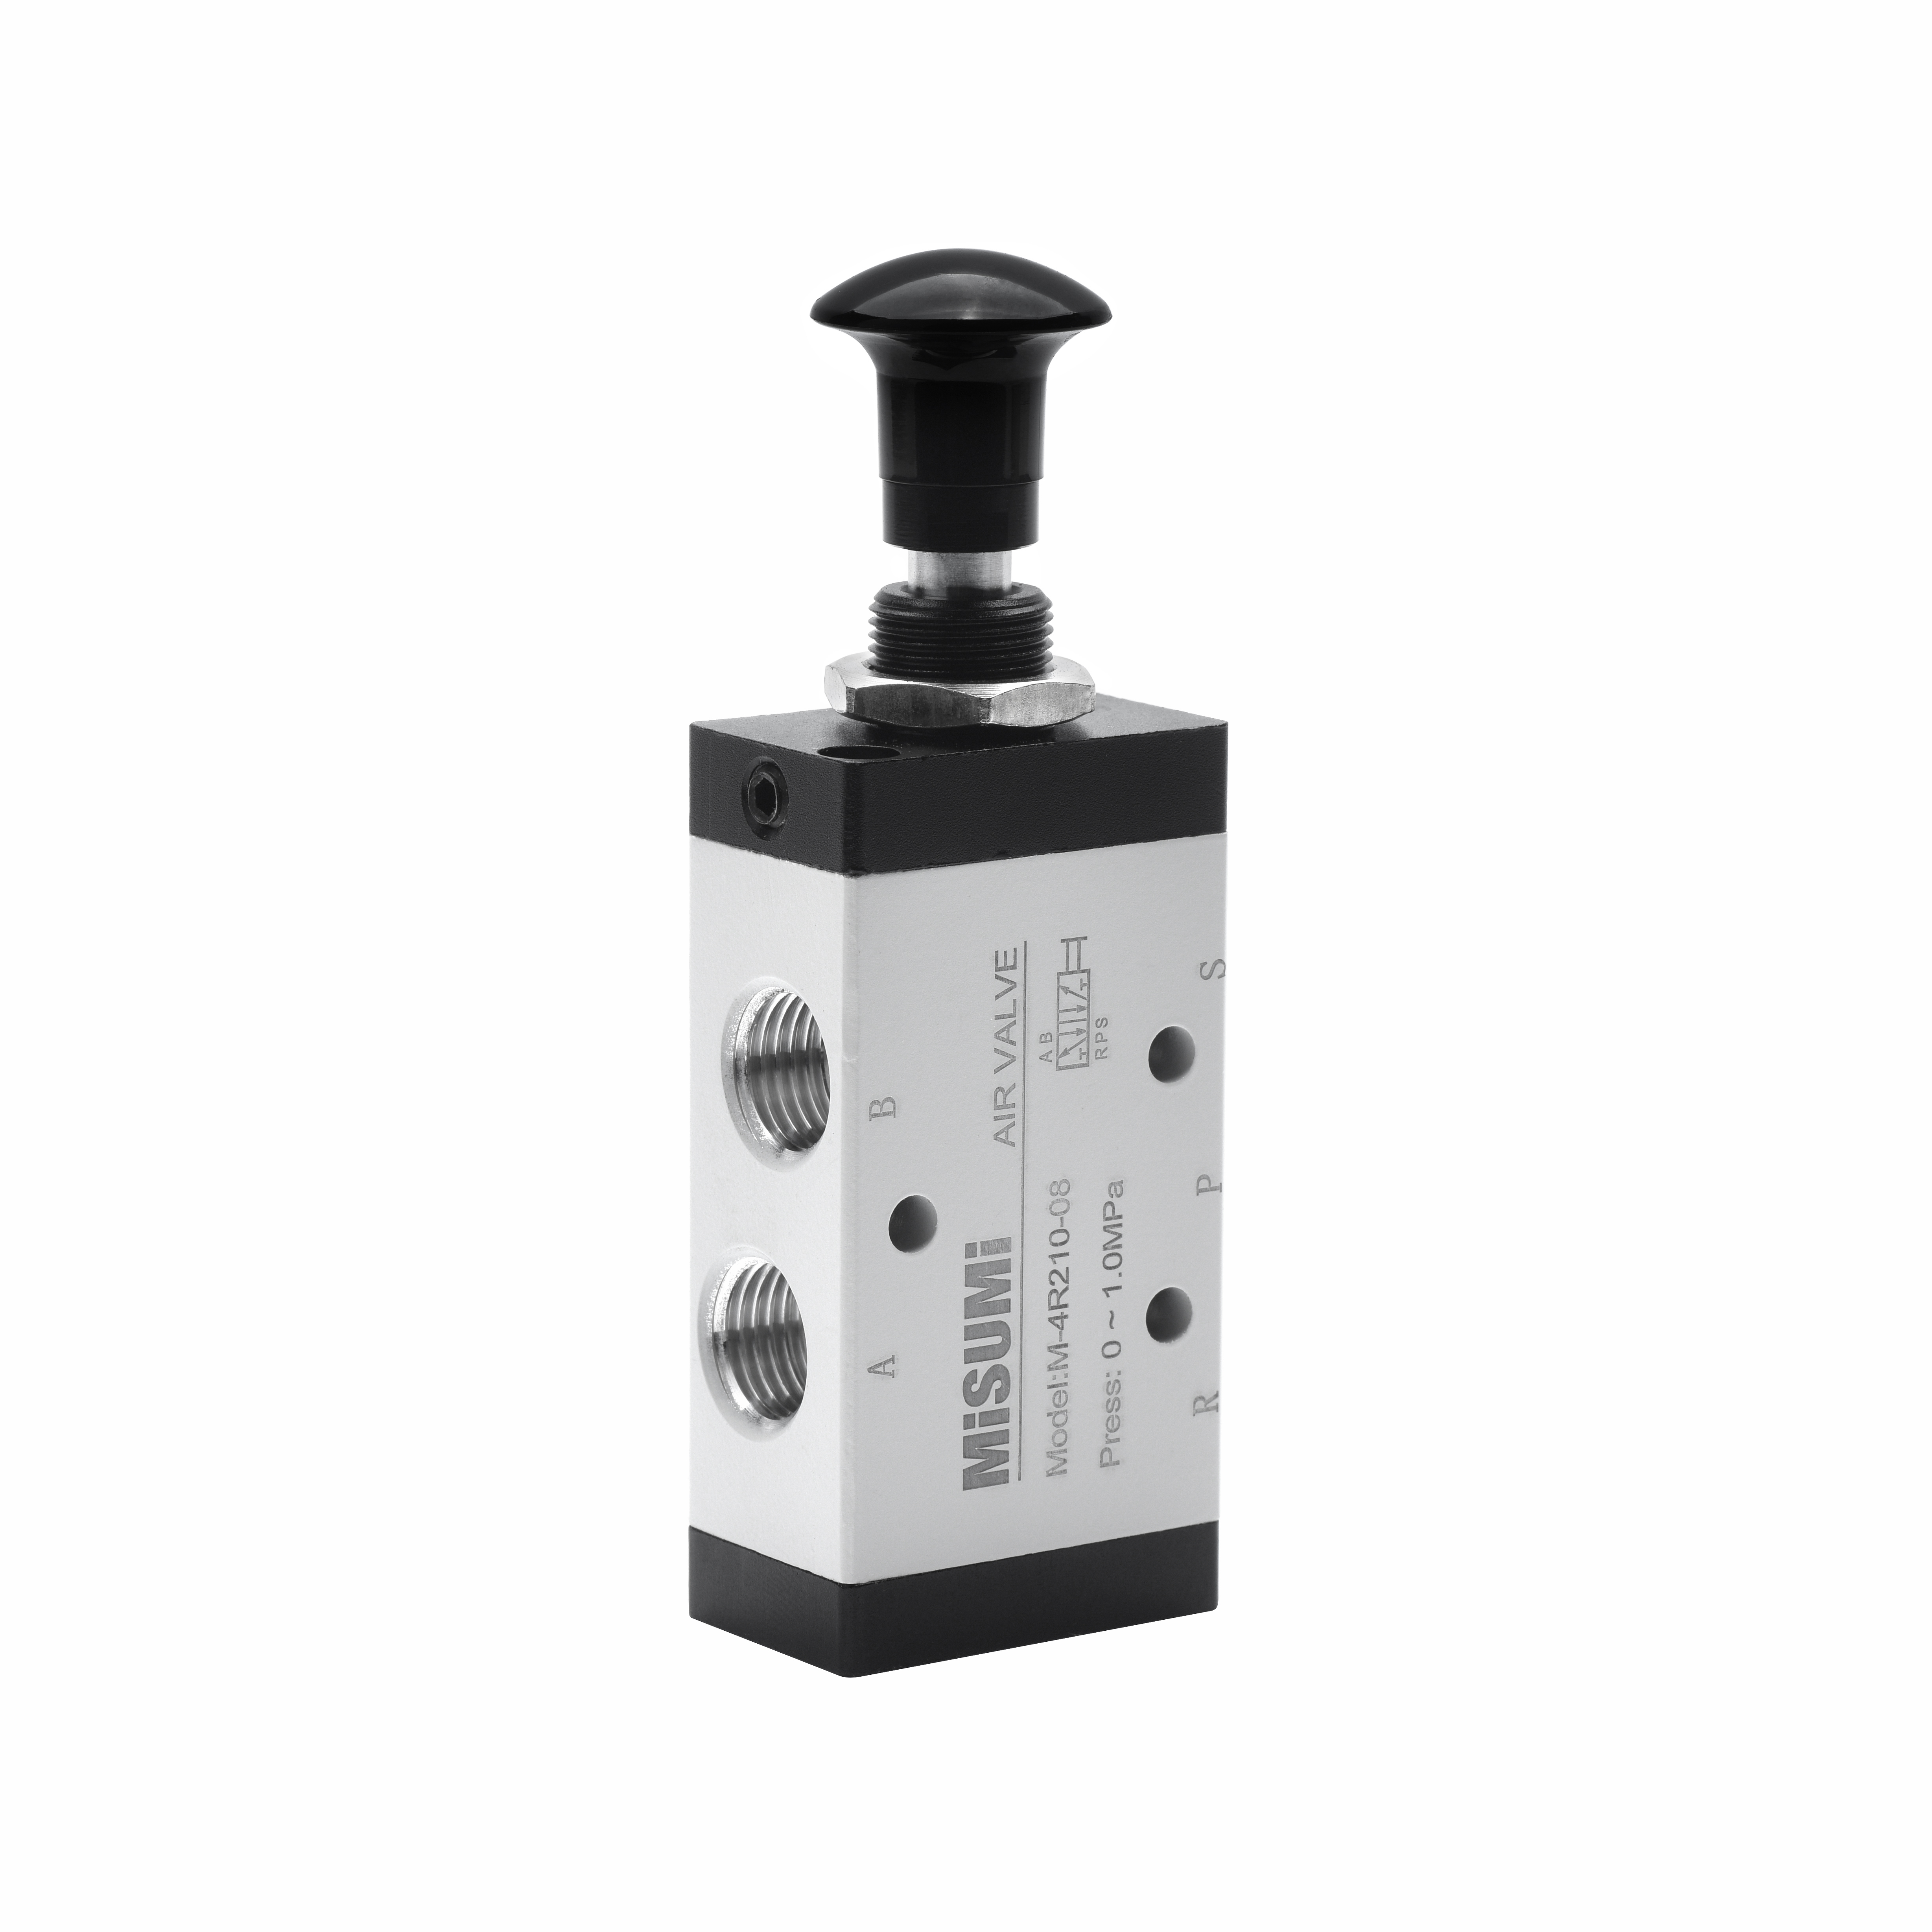 Hand Switching Valves With Pull Knob (E-MVP310-02-S)